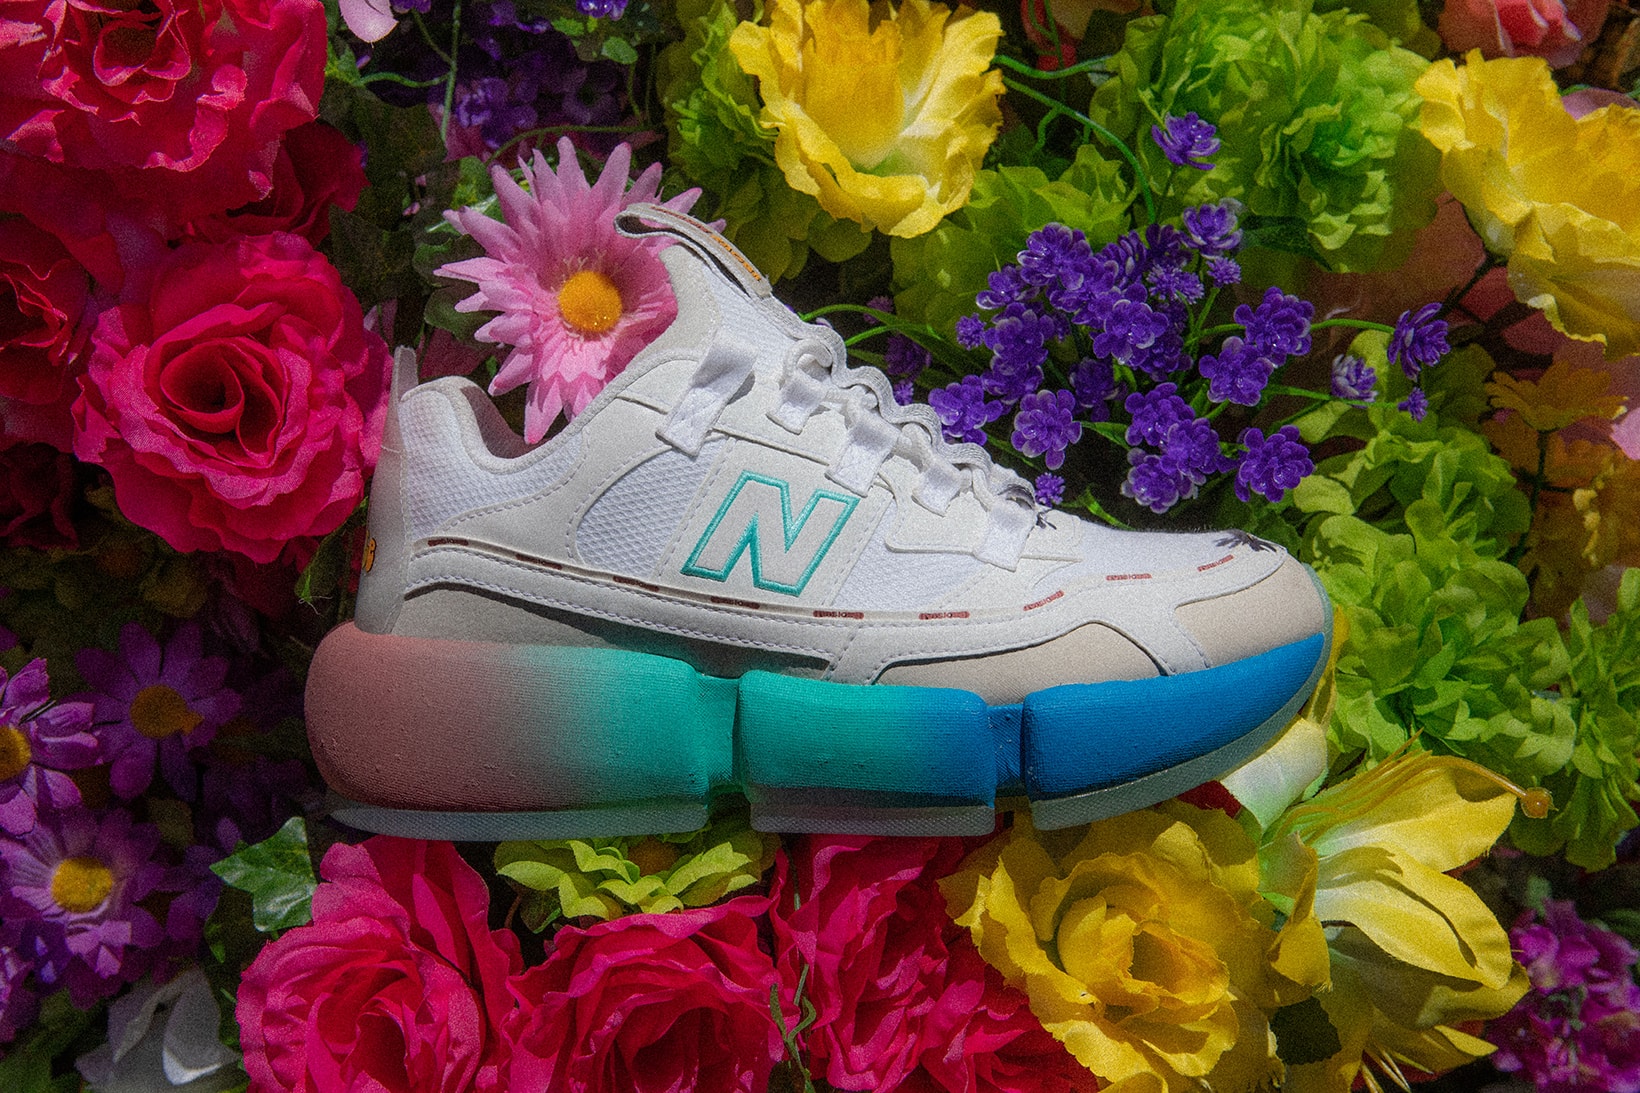 Jaden Smith New Balance Trippy Summer Vision Racer Pack Sneakers Collaboration Shoes Kicks Footwear